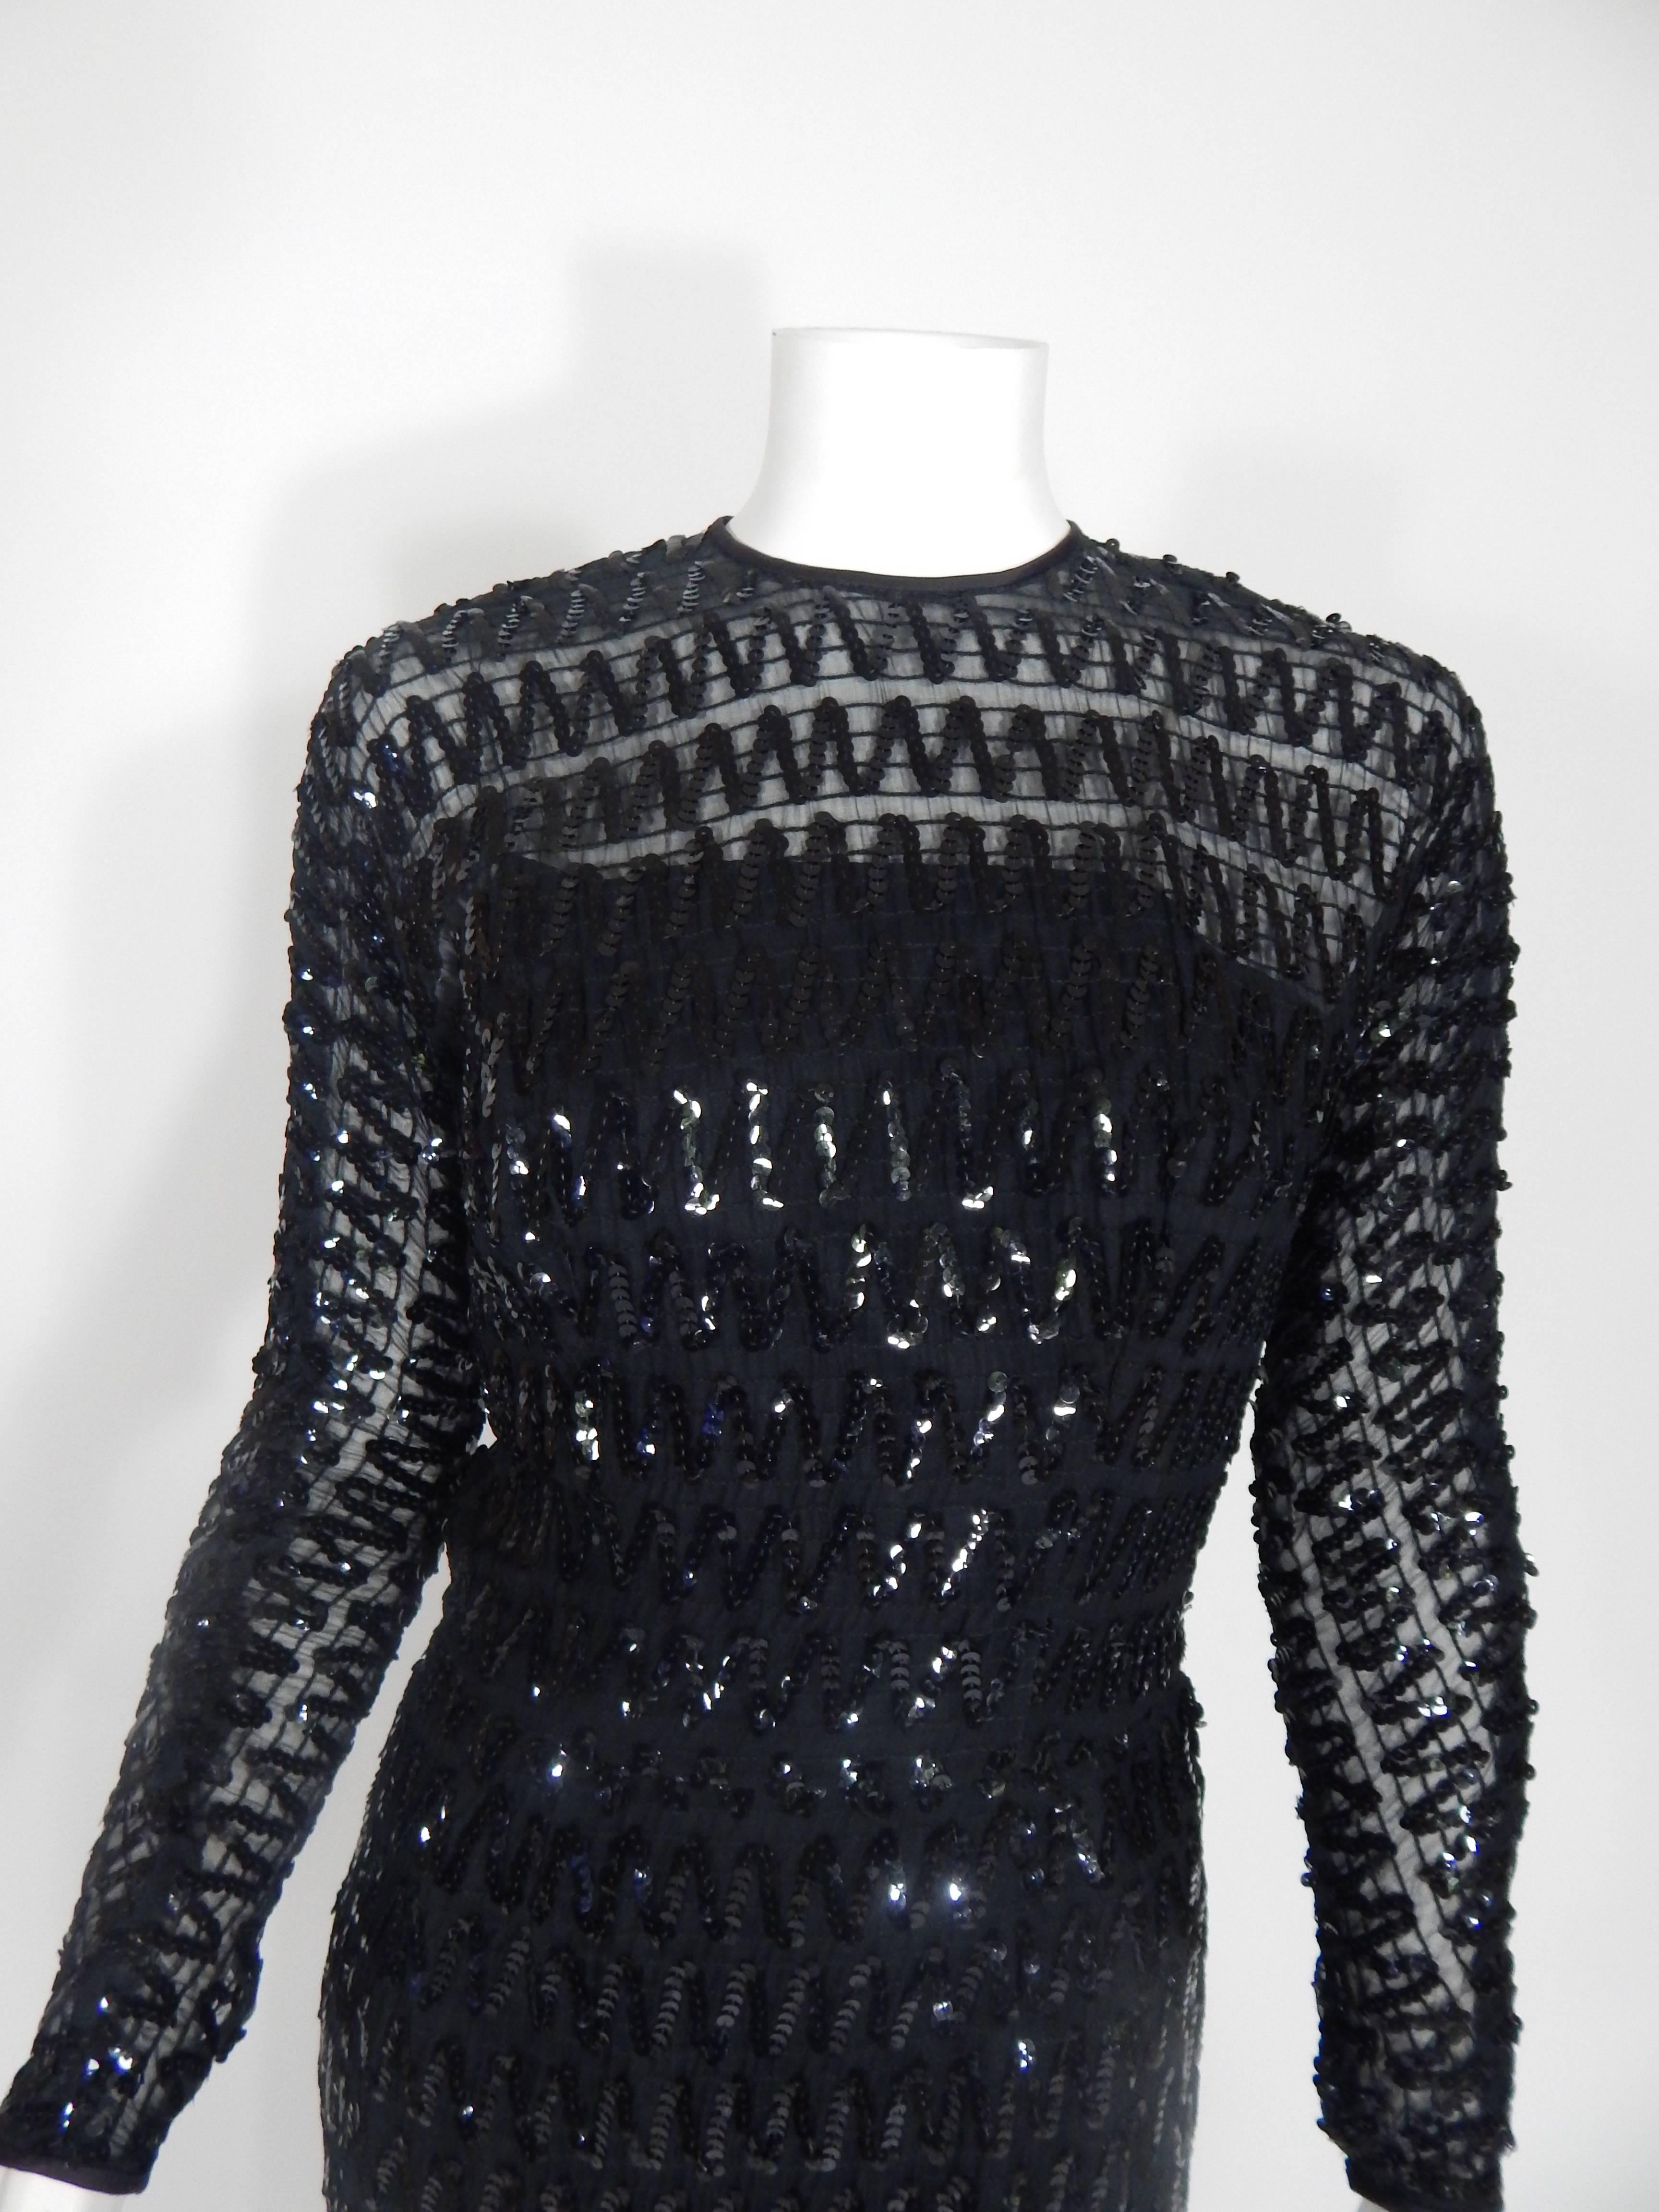 Black Sequin Sheer Dress, 1950s  In Excellent Condition For Sale In Long Island City, NY